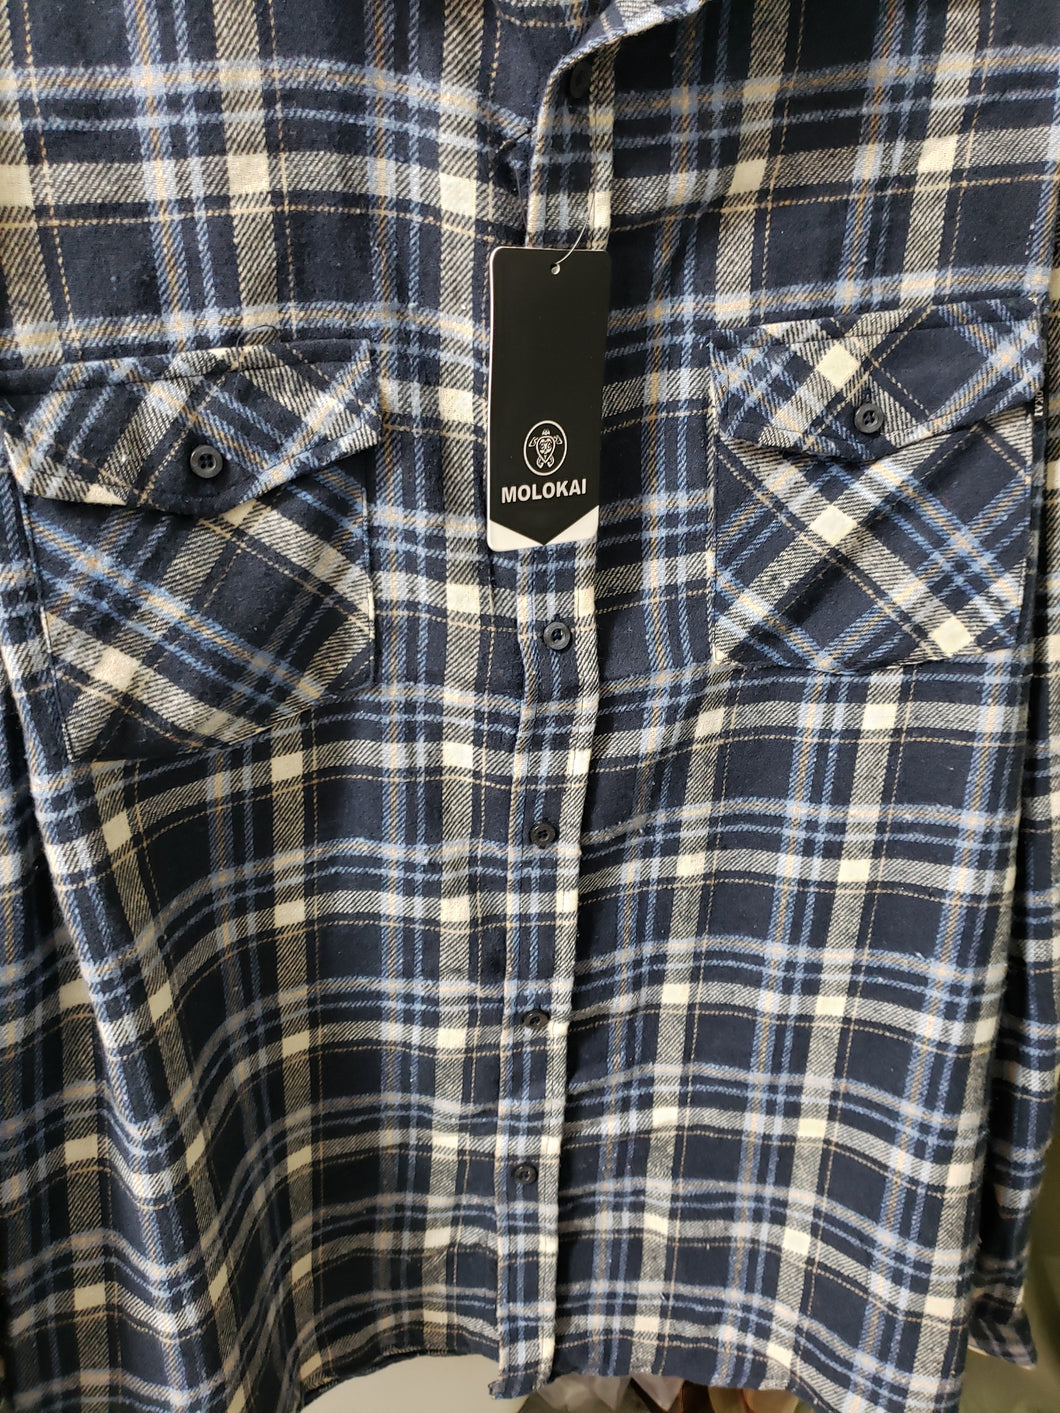 M-0002 different flannels